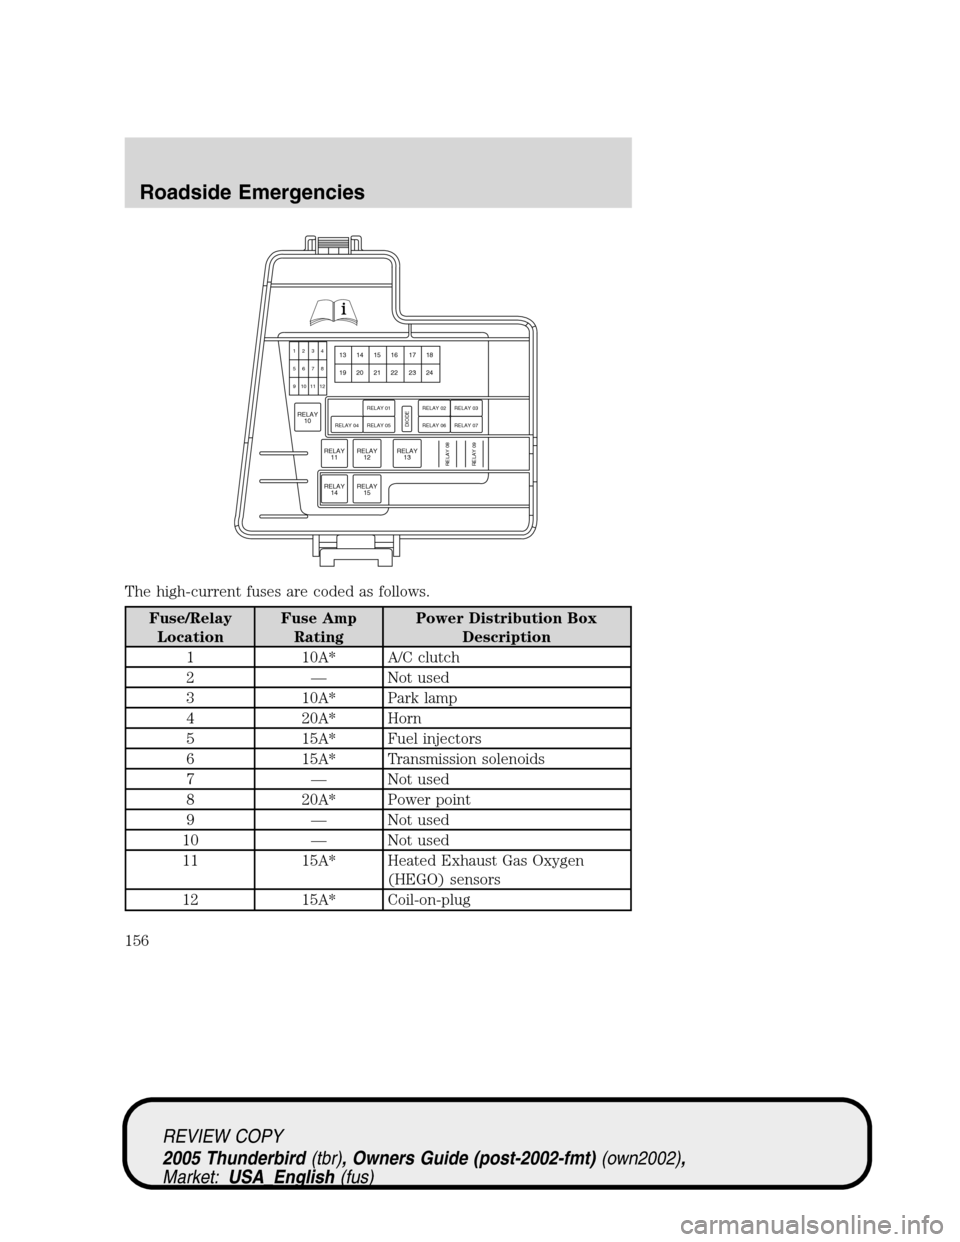 FORD THUNDERBIRD 2005 11.G Owners Manual The high-current fuses are coded as follows.
Fuse/Relay
LocationFuse Amp
RatingPower Distribution Box
Description
1 10A* A/C clutch
2—Not used
3 10A* Park lamp
4 20A* Horn
5 15A* Fuel injectors
6 15